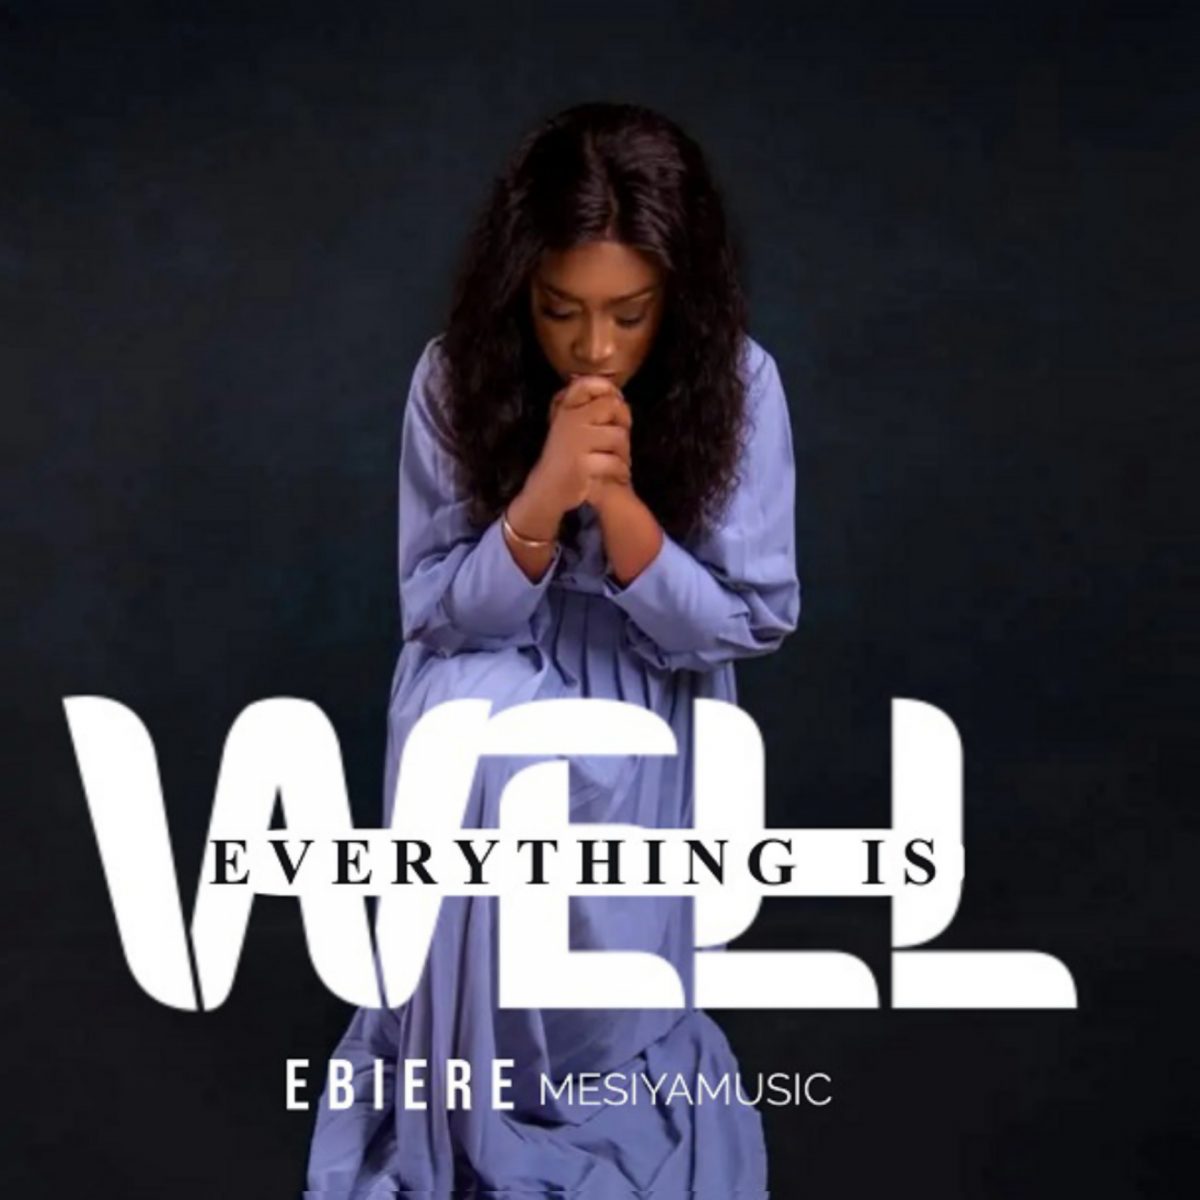 Everything Is Well By Ebiere Mesiyamusic